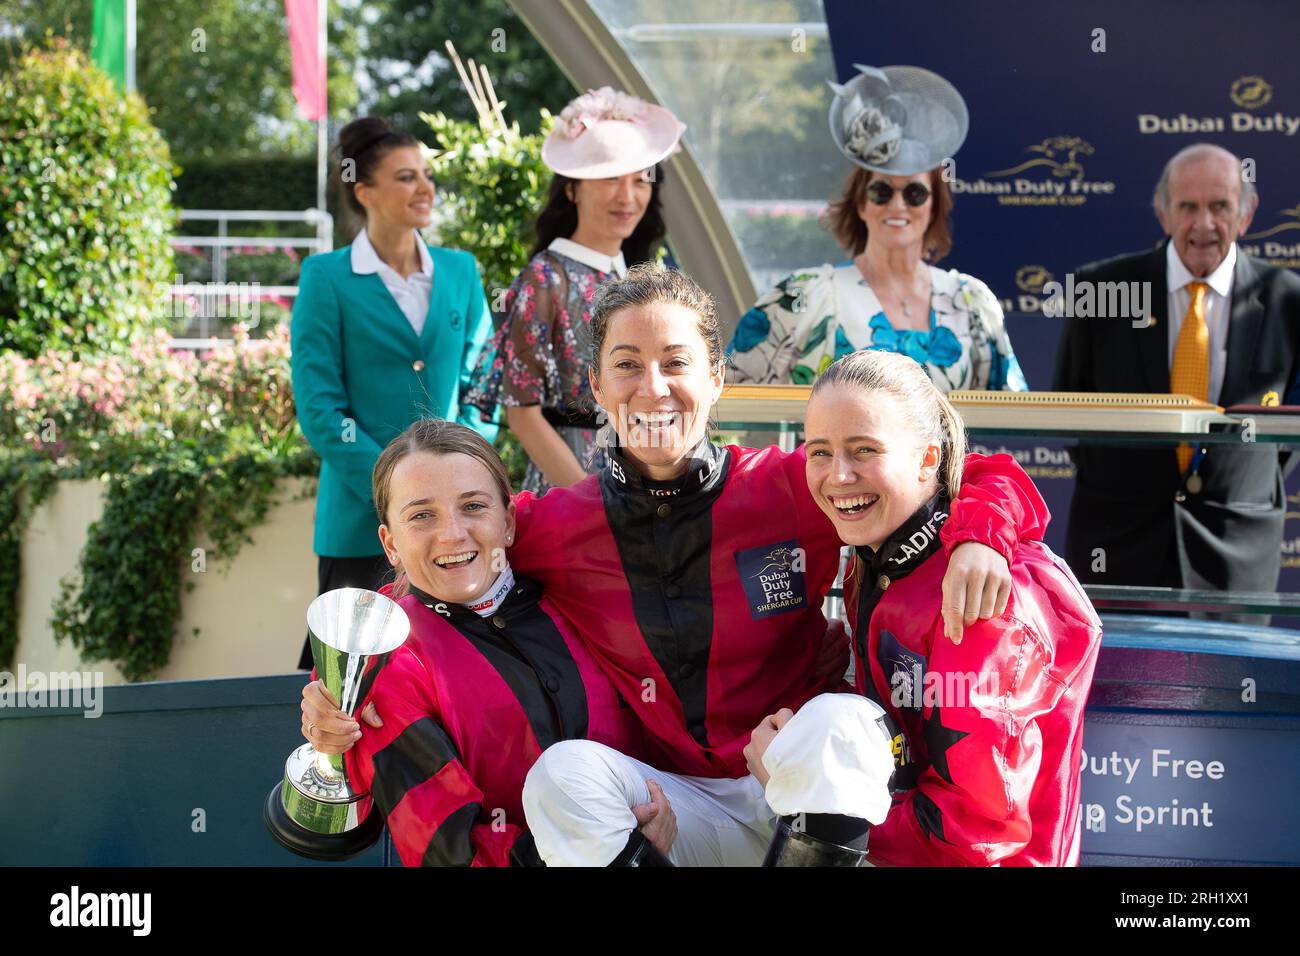 Ascot, Berkshire, UK. 12th August, 2023. Fun and laughter for winning The Ladies Team of Hollie Doyle (L), Captain Hayley Turner (M) and Saffie Osborne (R) who won the overall team at the Dubai Duty Free Shergar Cup at Ascot Racecourse today. Credit: Maureen McLean/Alamy Live News Stock Photo